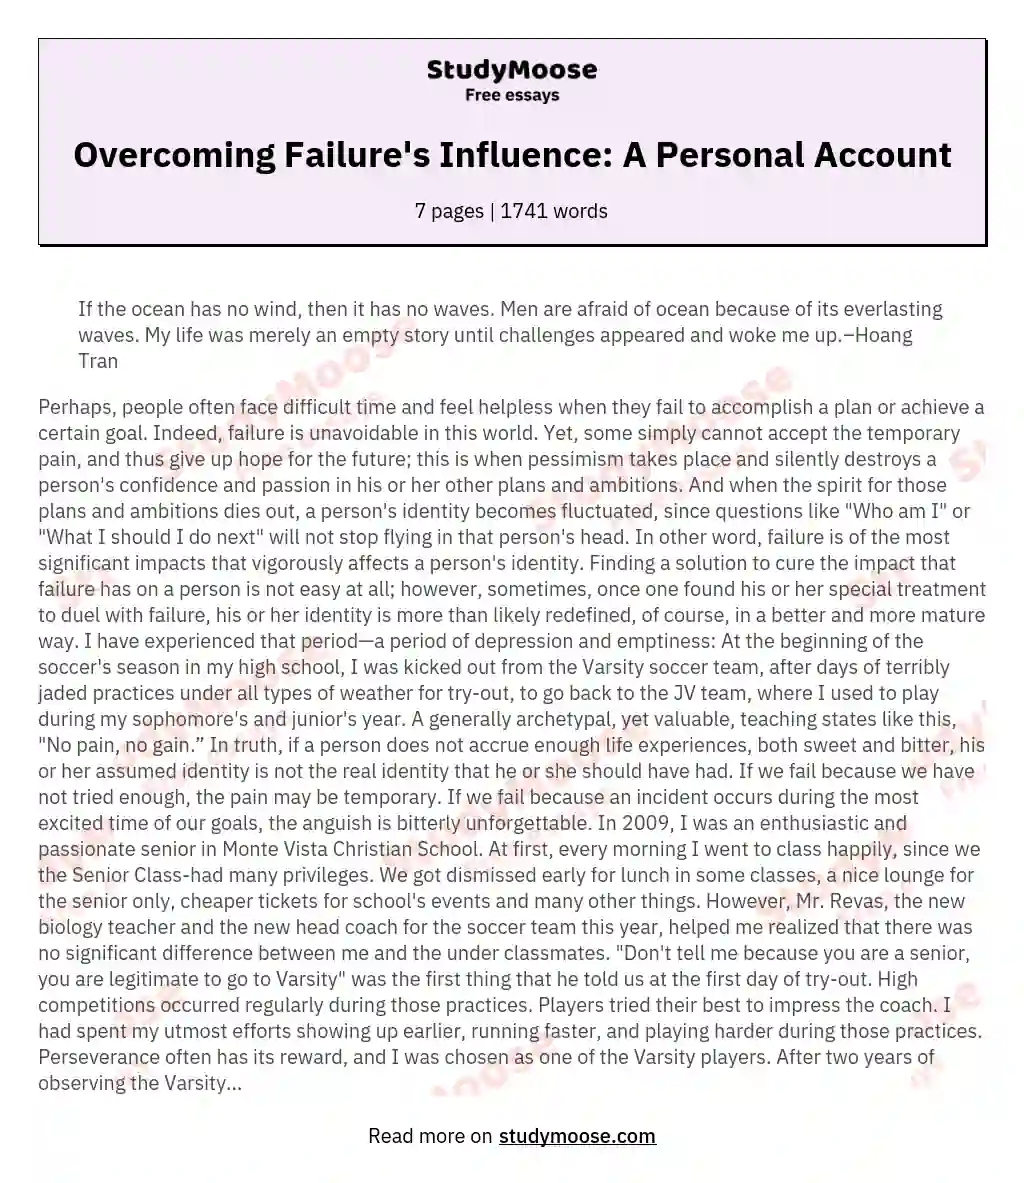 Overcoming Failure's Influence: A Personal Account essay